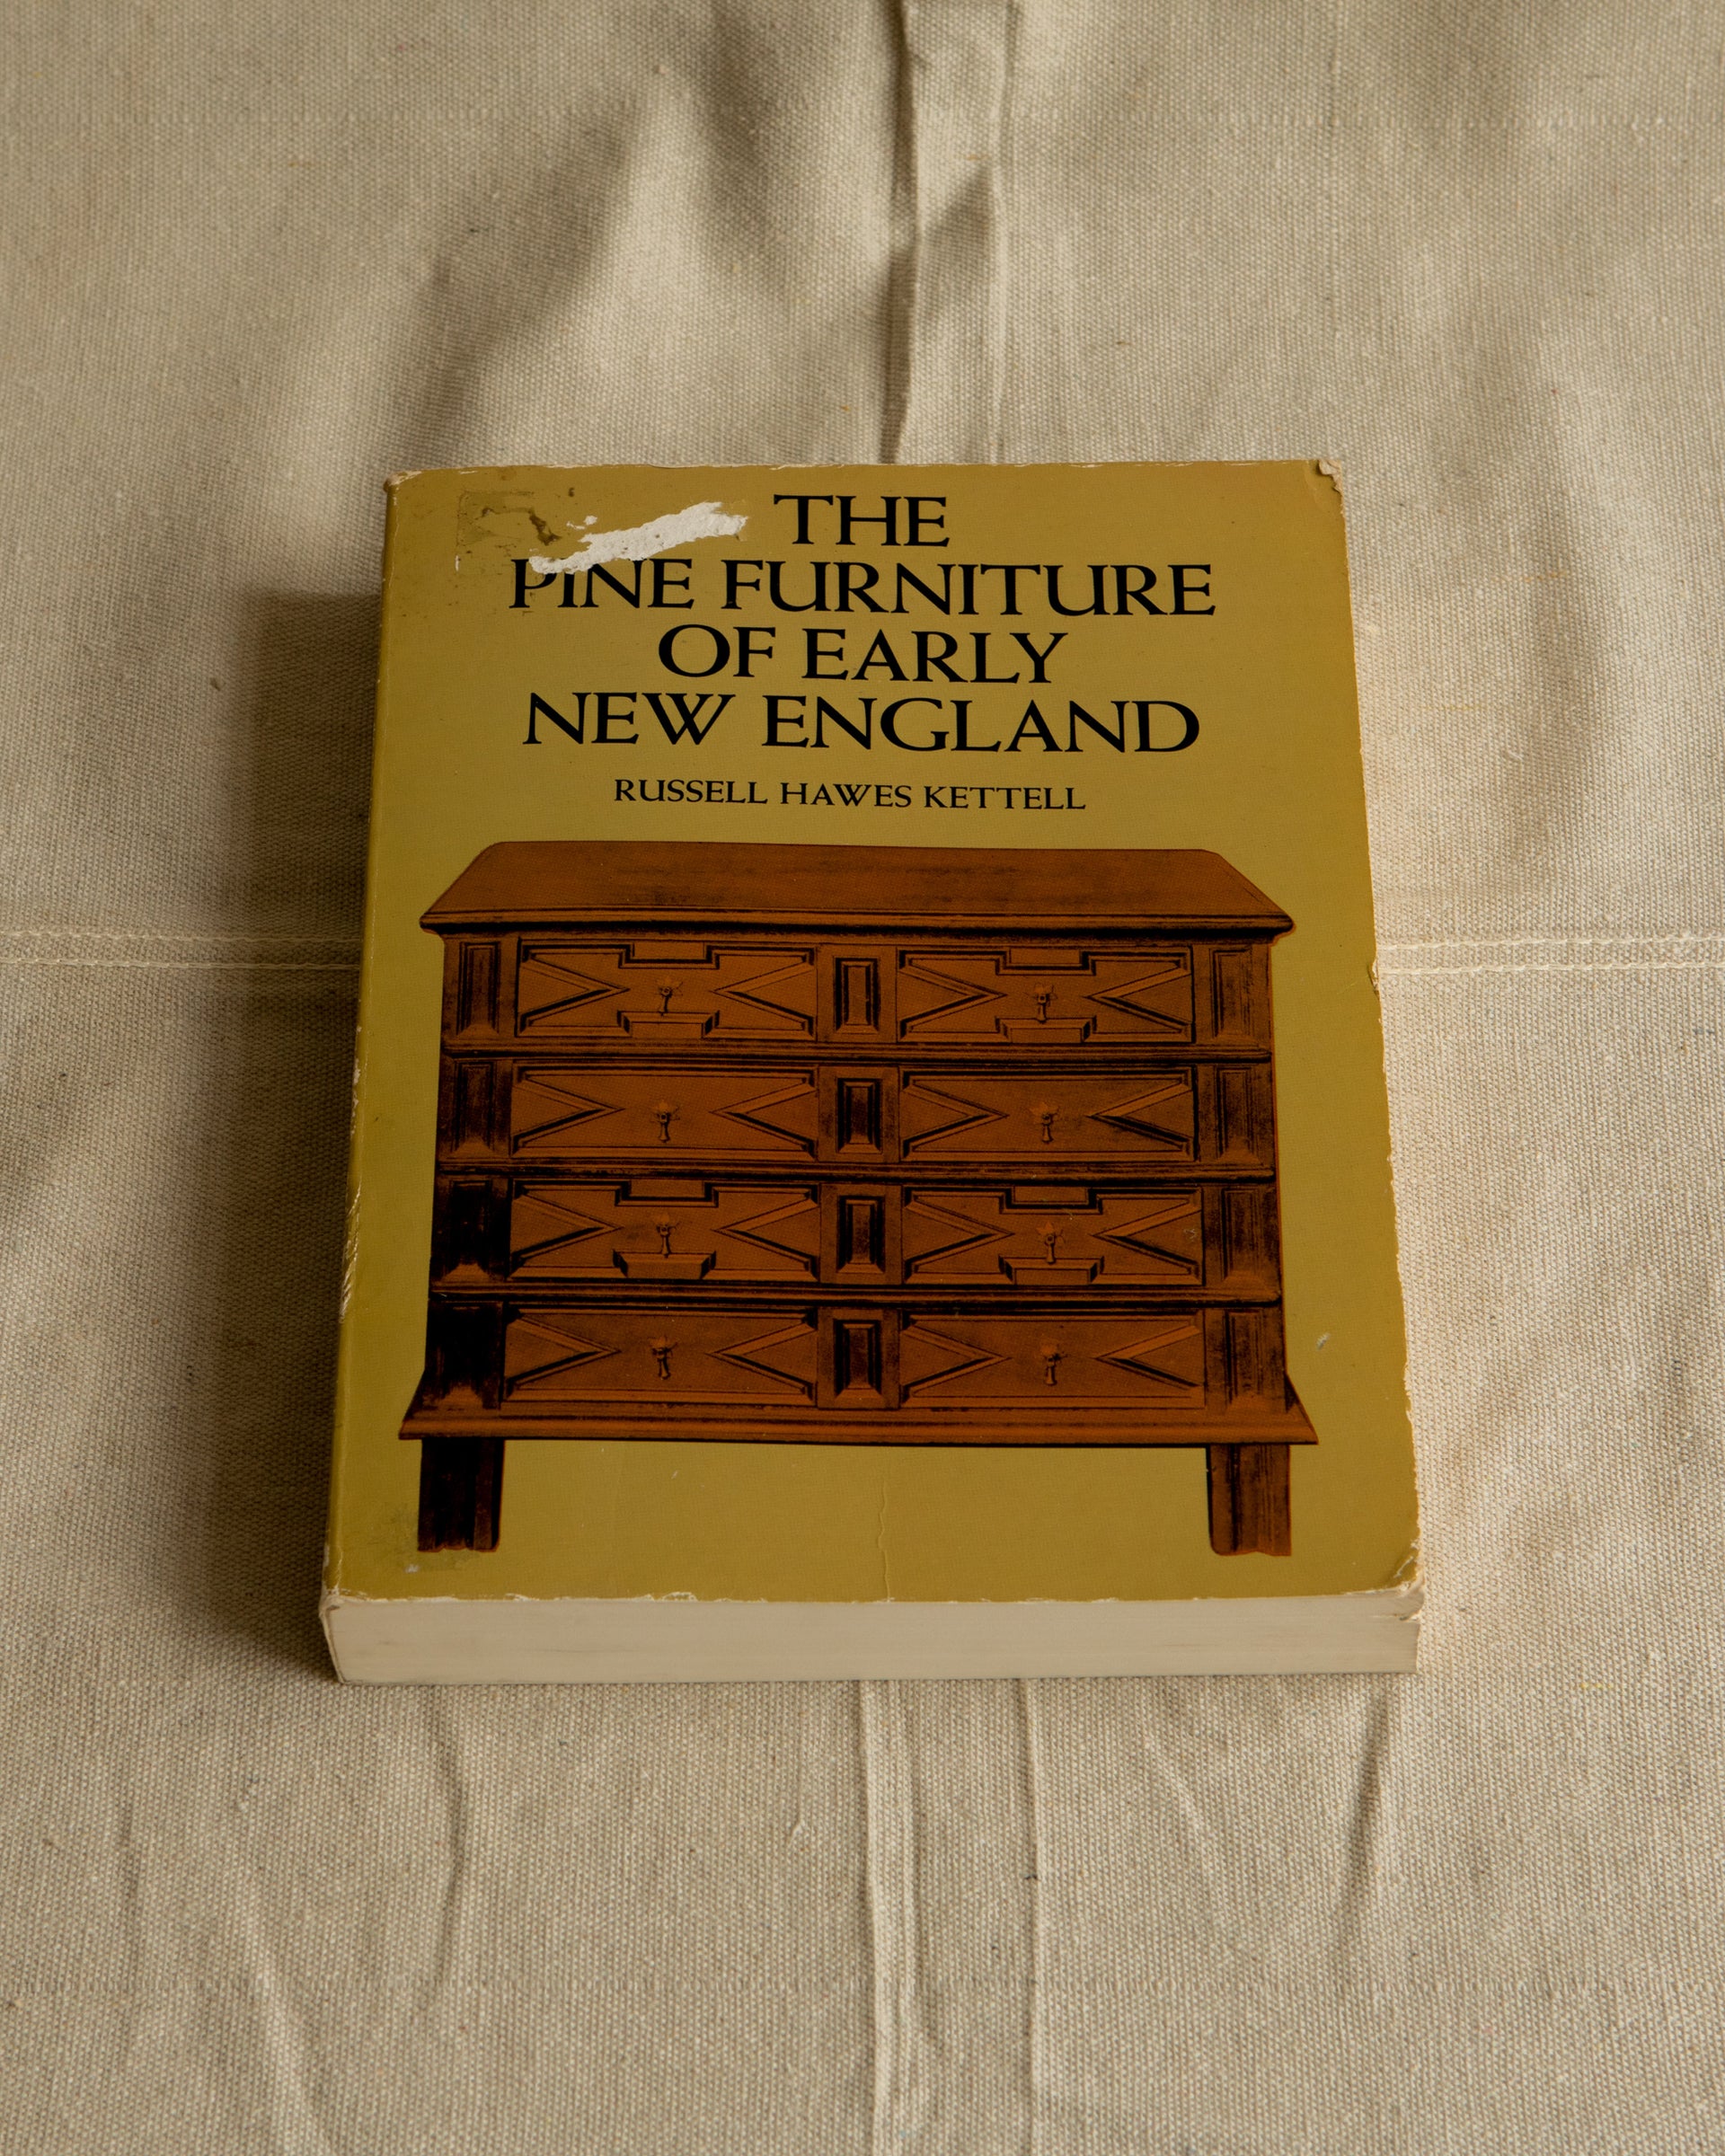 The Pine Furniture of Early New England